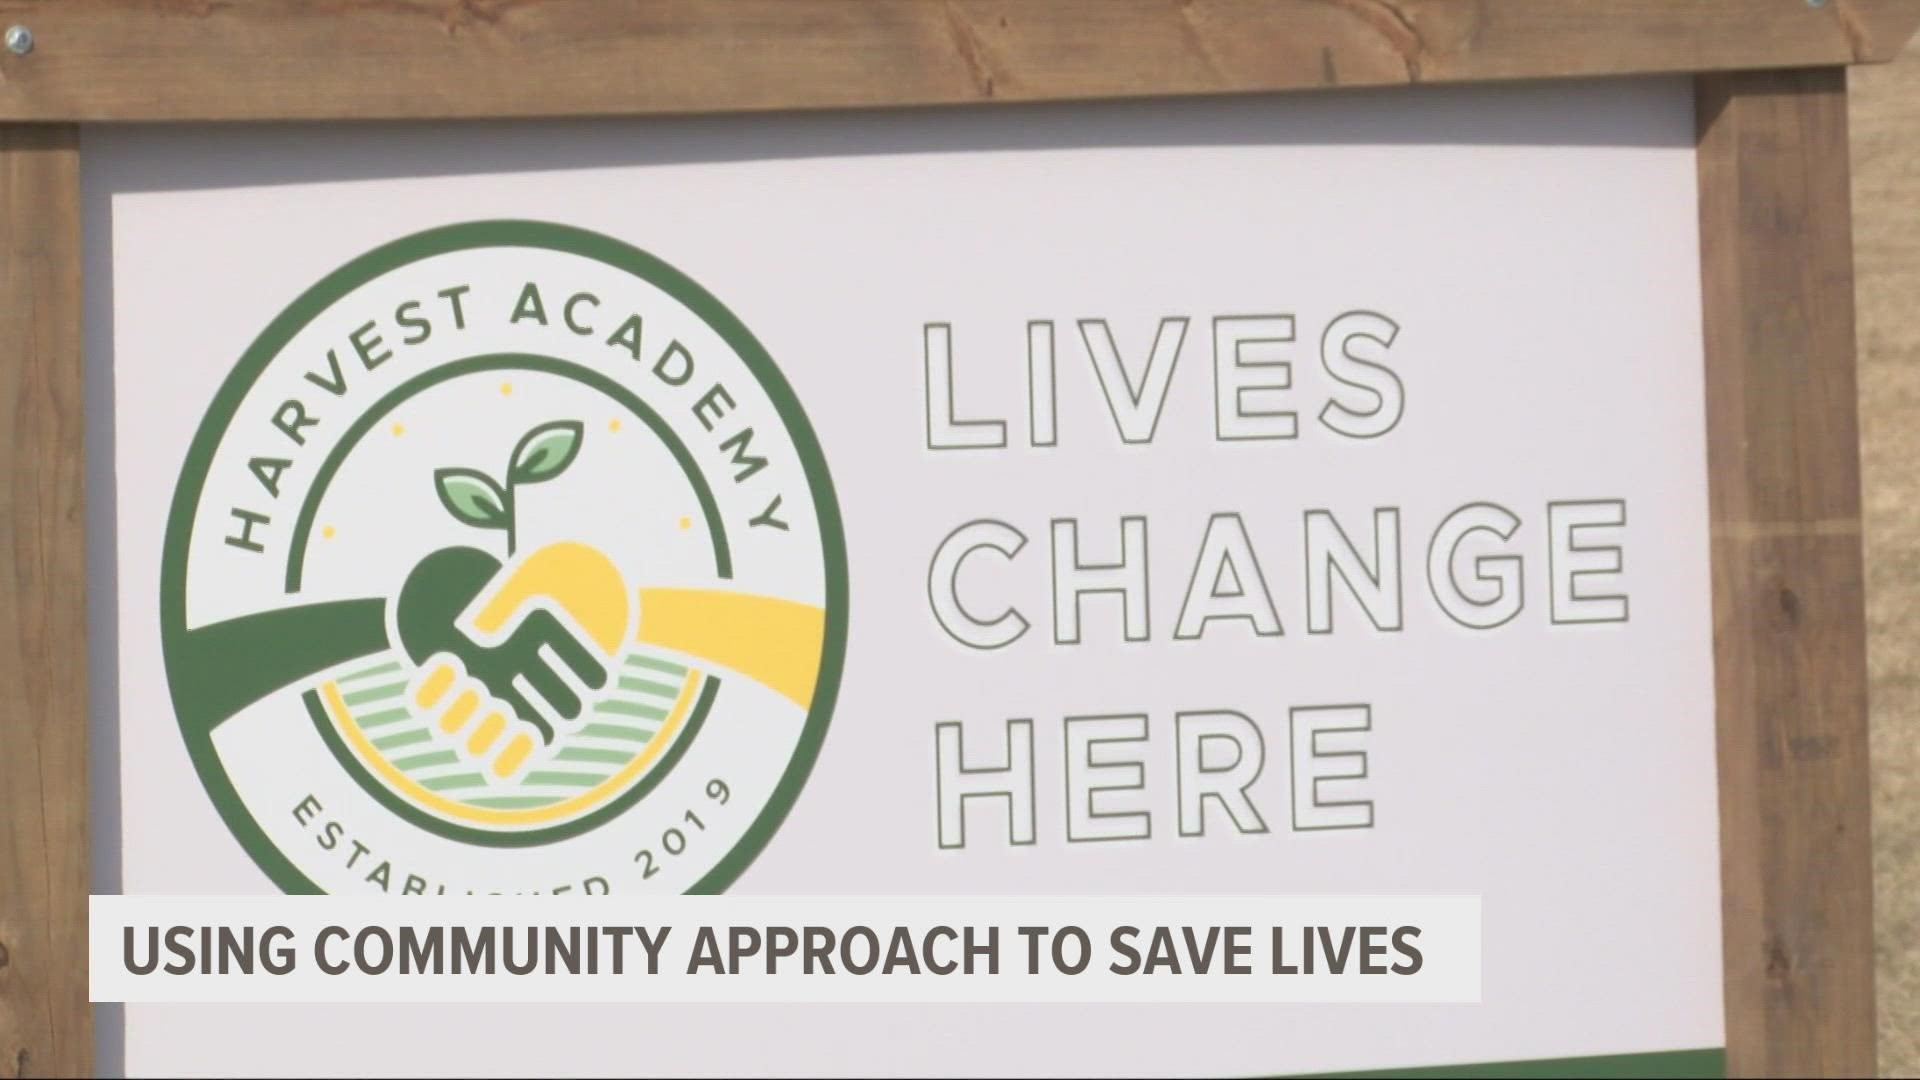 A program in Indianola is taking a community approach to help people beat addiction, criminal activity and homelessness.